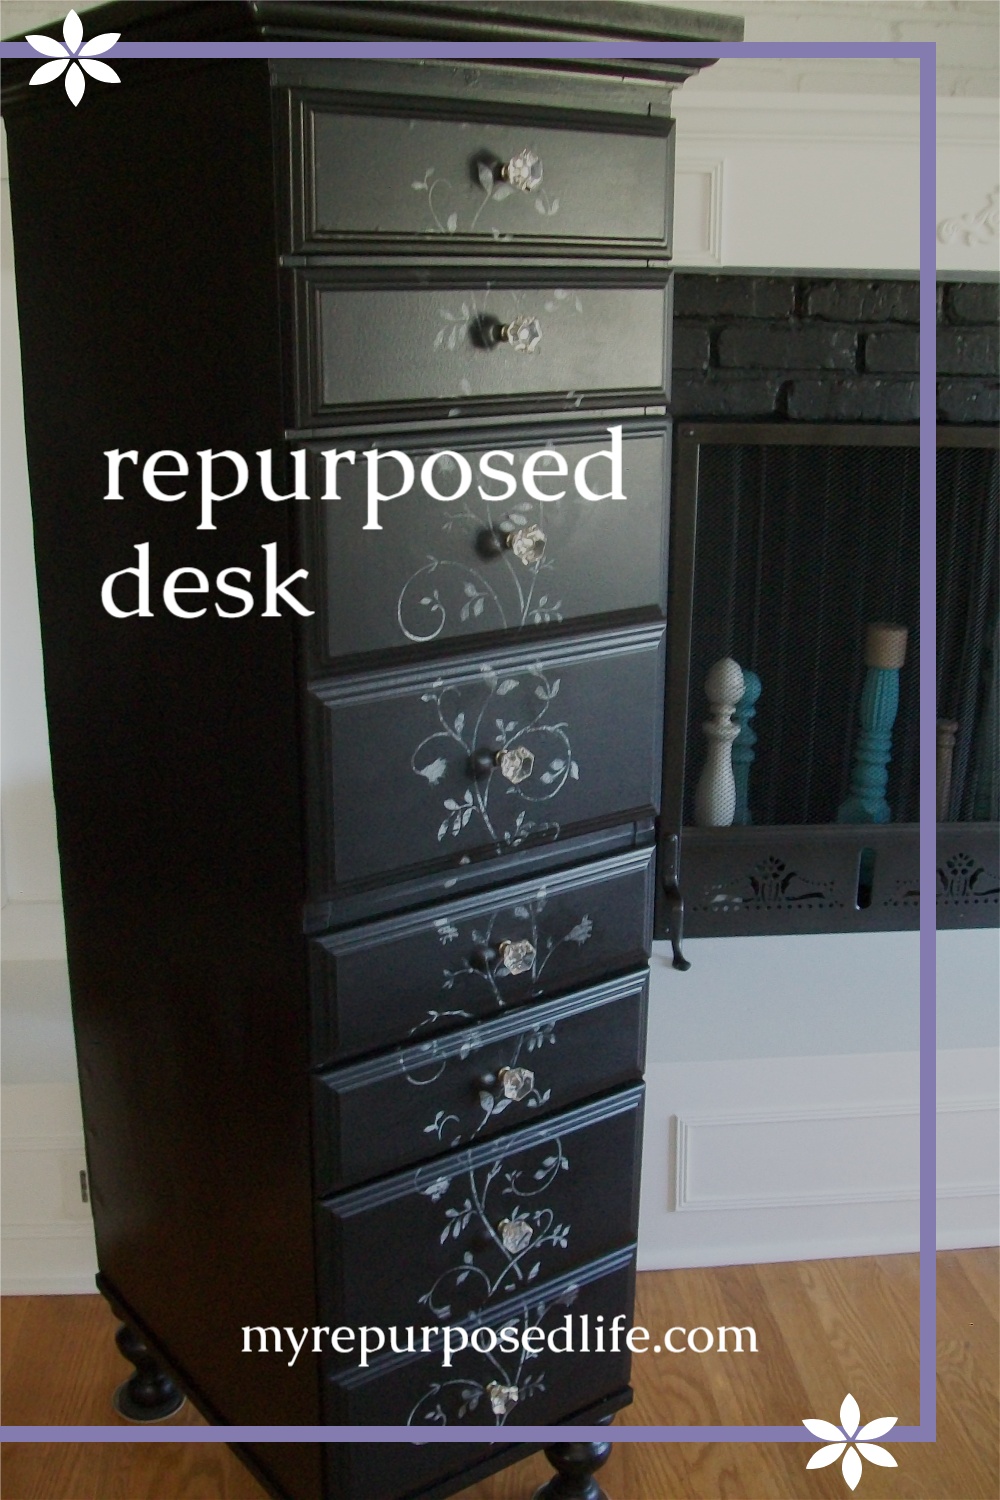 Using a repurposed desk to make a tall chest, keeps all the storage area. However it creates a smaller footprint in your space. Step by step directions. #MyRepurposedLife #repurposed #furniture #desk #chest #organization #doityourself via @repurposedlife